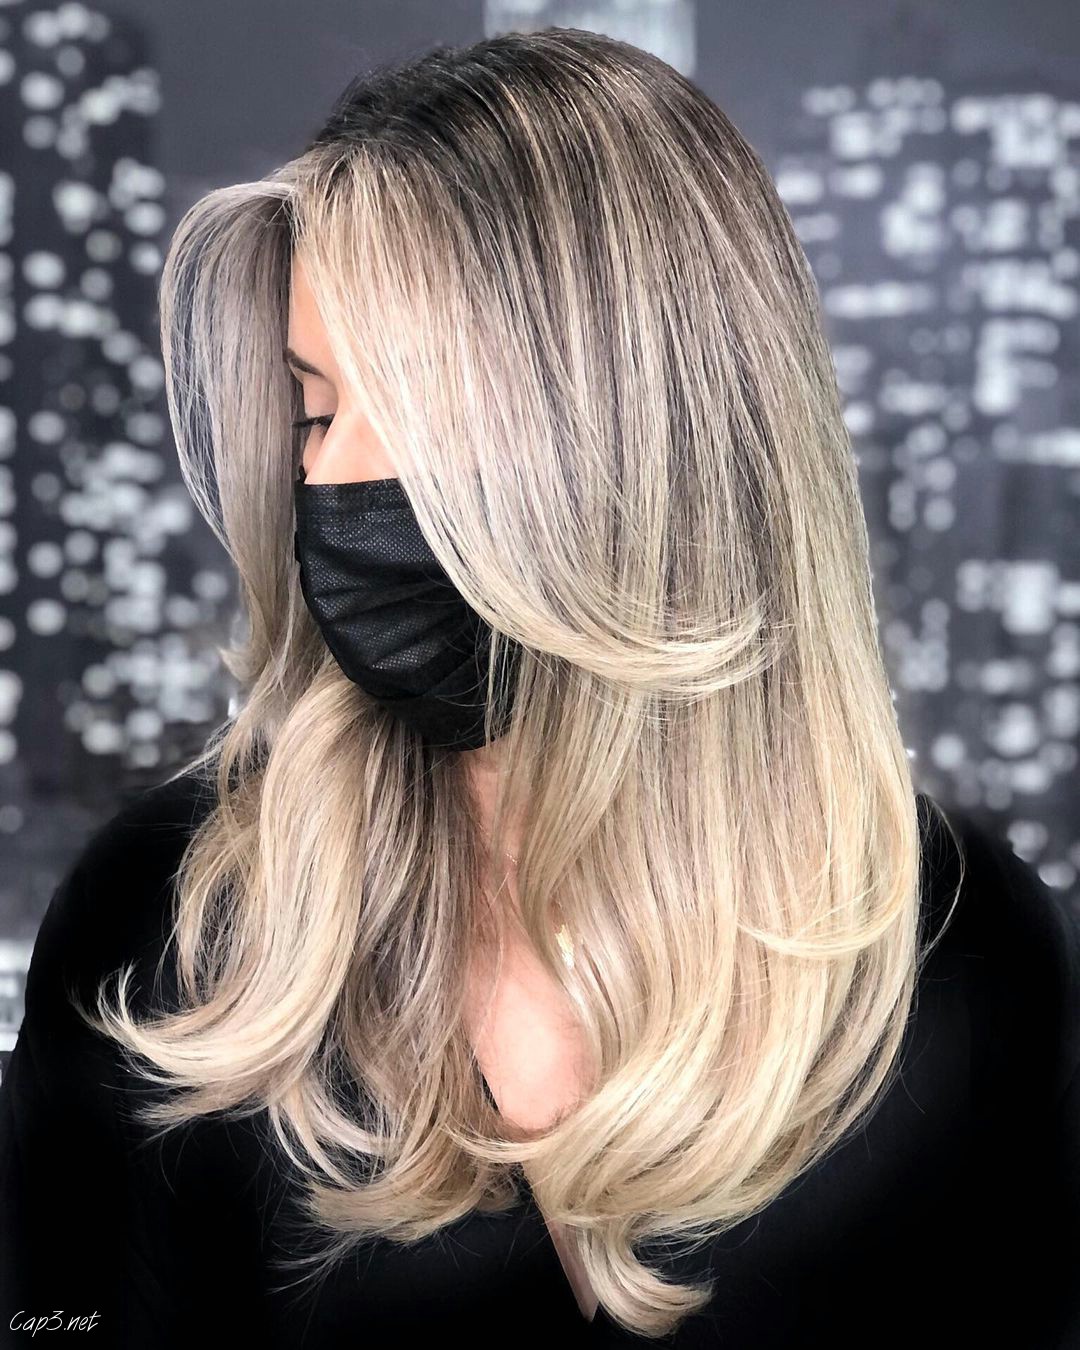 Icy Blonde Highlights For Round Face